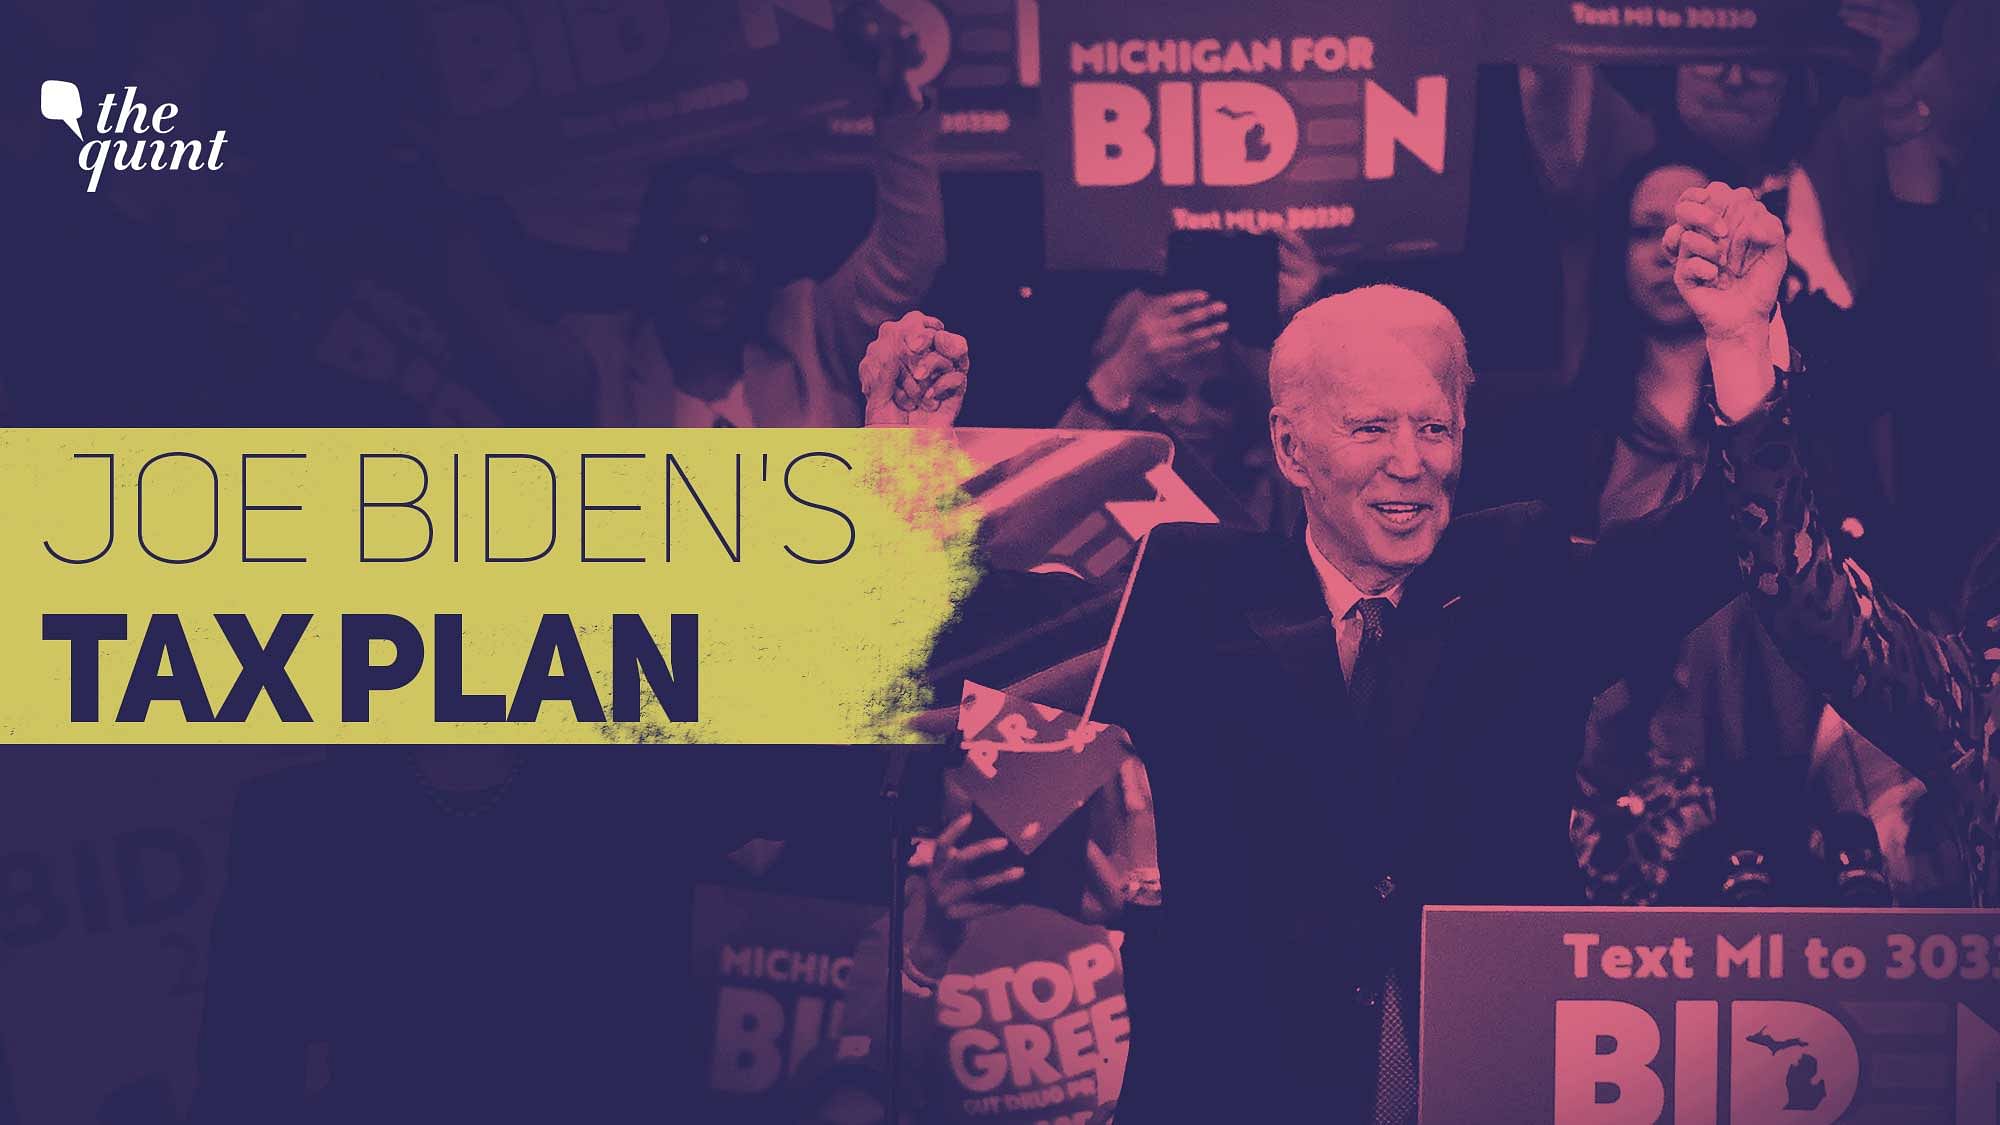 Indian-American voters are torn over Democratic Presidential candidate Joe Biden’s tax plan.